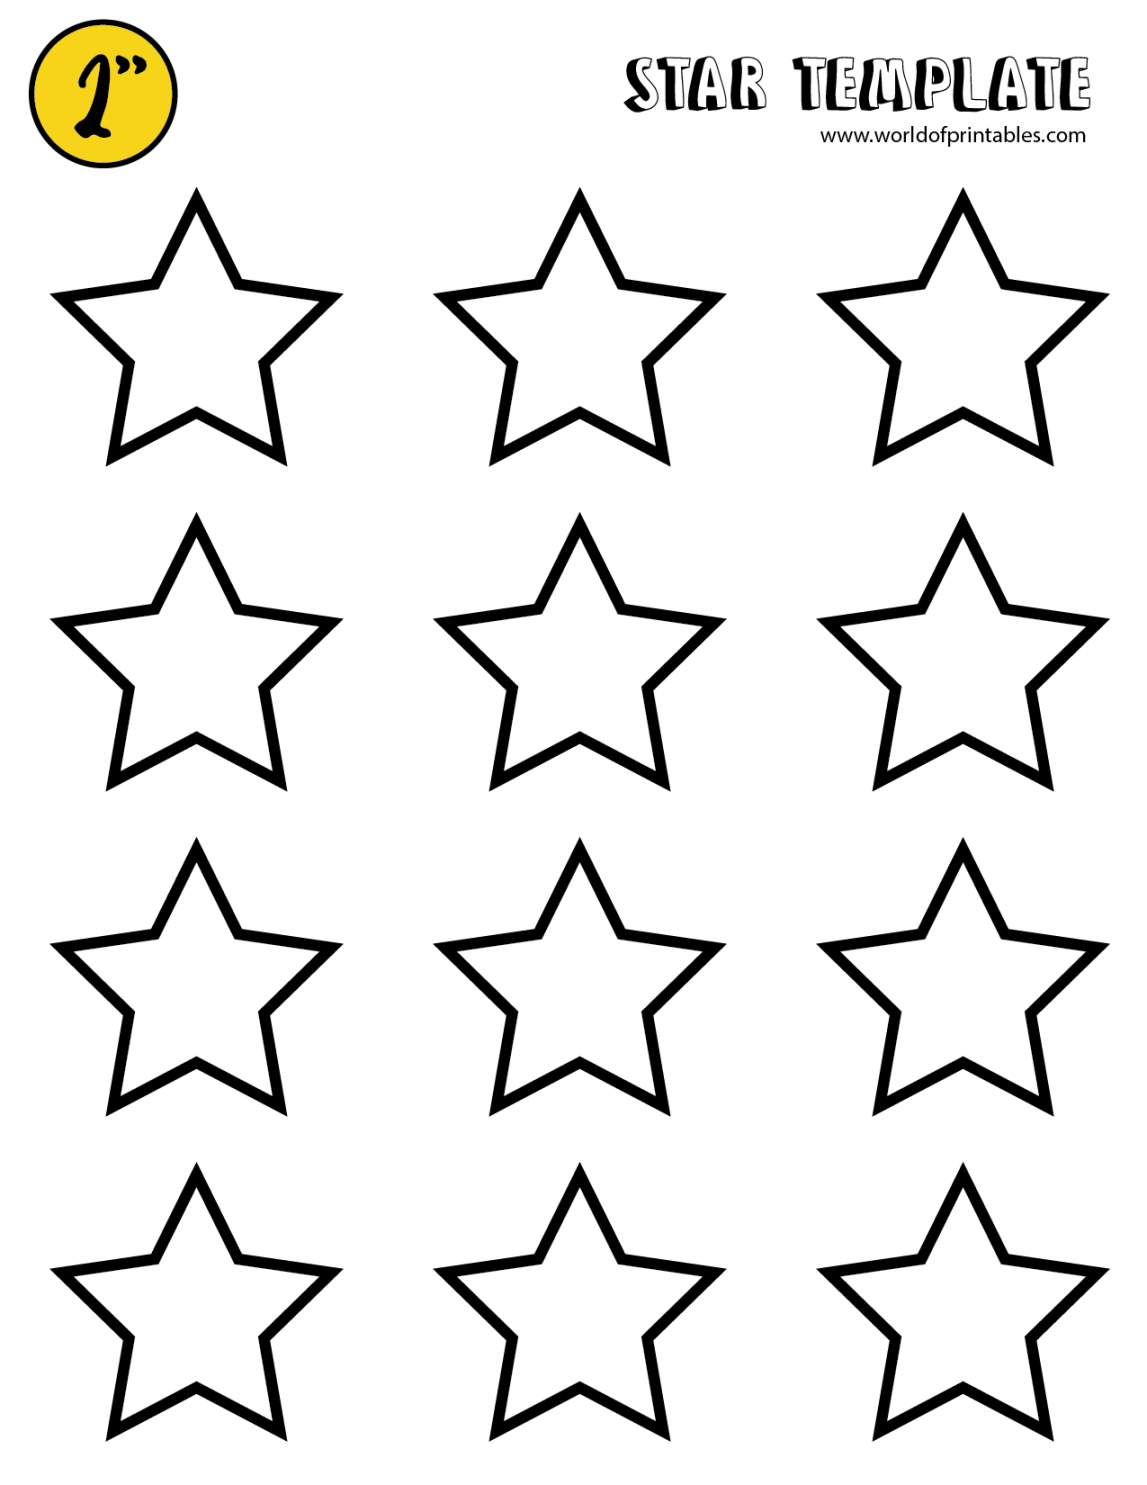 Free Star Template Printables - World of Printables - FREE Printables - Star Template Printable Free